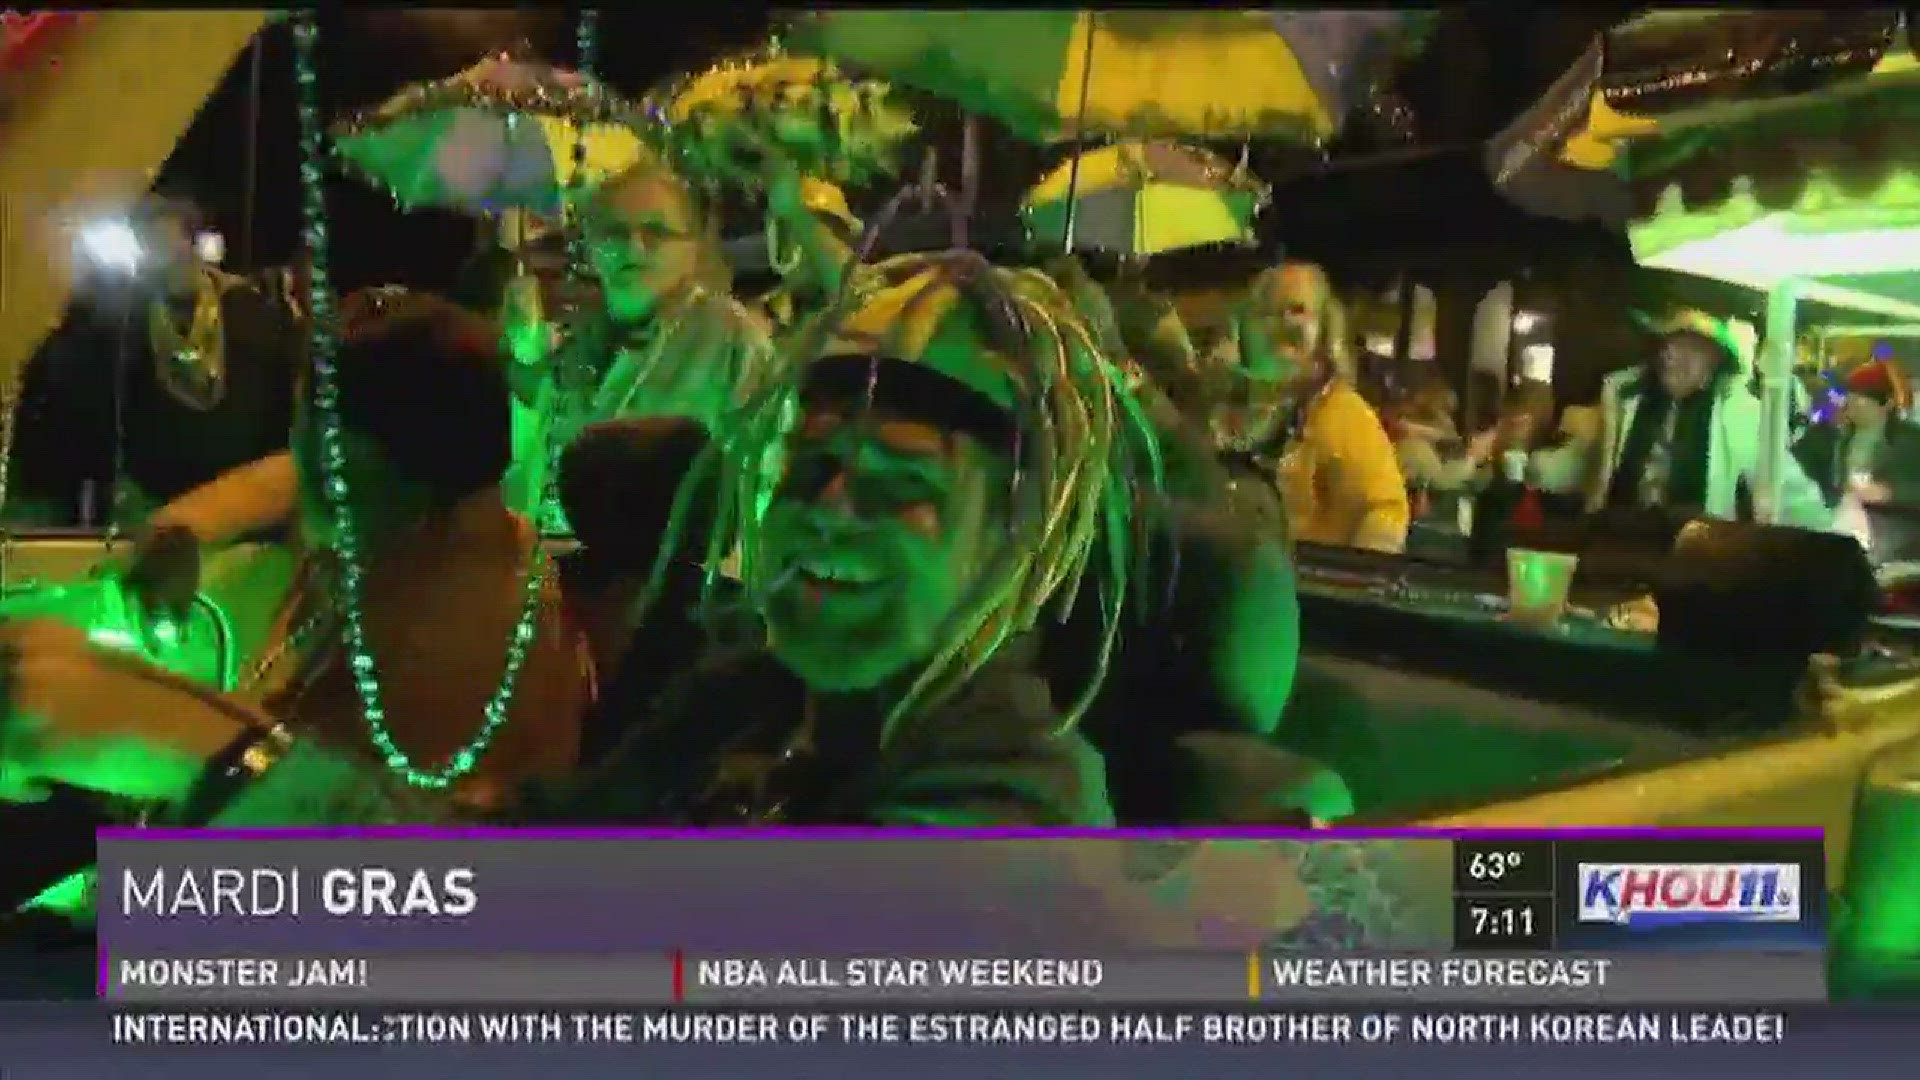 The third largest Mardi Gras celebration in the country is underway in Galveston- here's a look at what you can look forward to